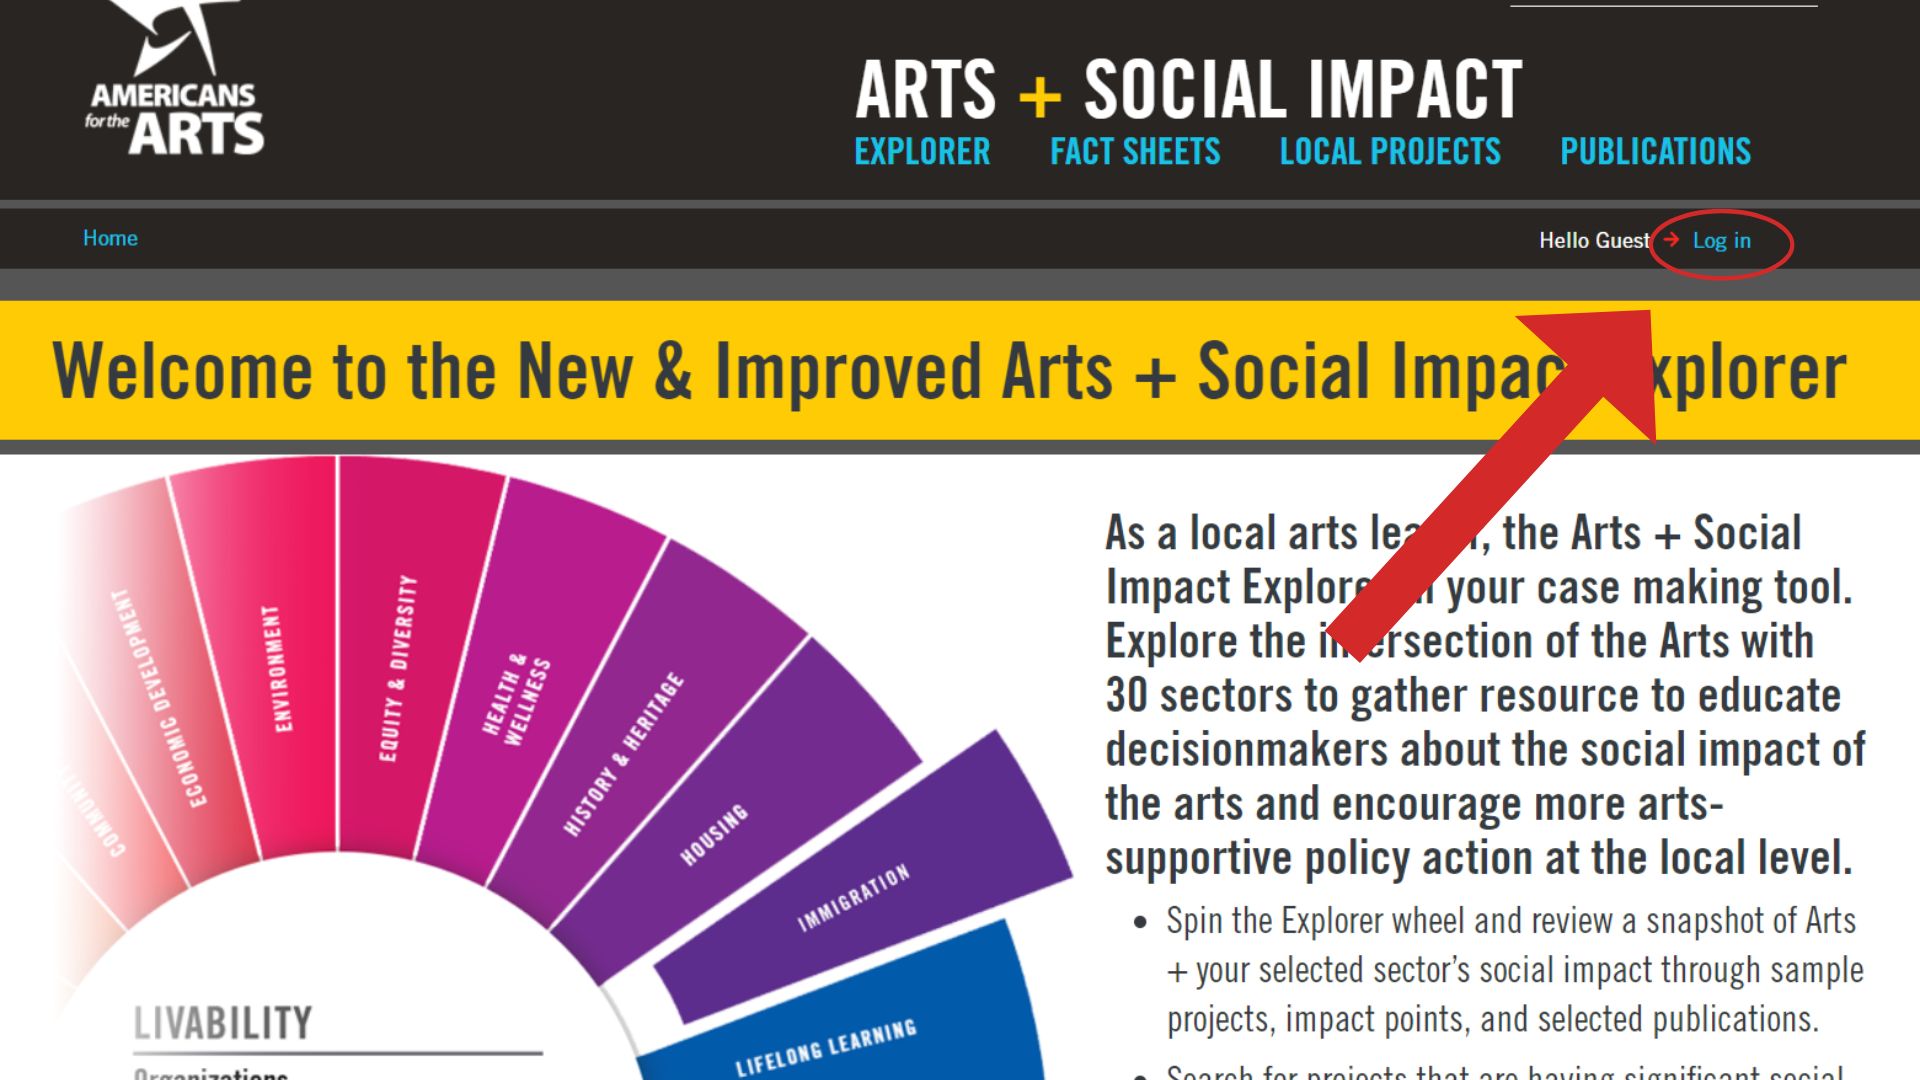 A webpage with a black heading, yellow banner and white background. The webpage features text about the Arts and Impact Explorer as well as a cropped image of the wheel. The wheel features different shades of red and purple with text on the slices of the wheel. There is a red arrow pointing to a red circle in the upper right hand corner. Within the red circle are blue words that say log in.